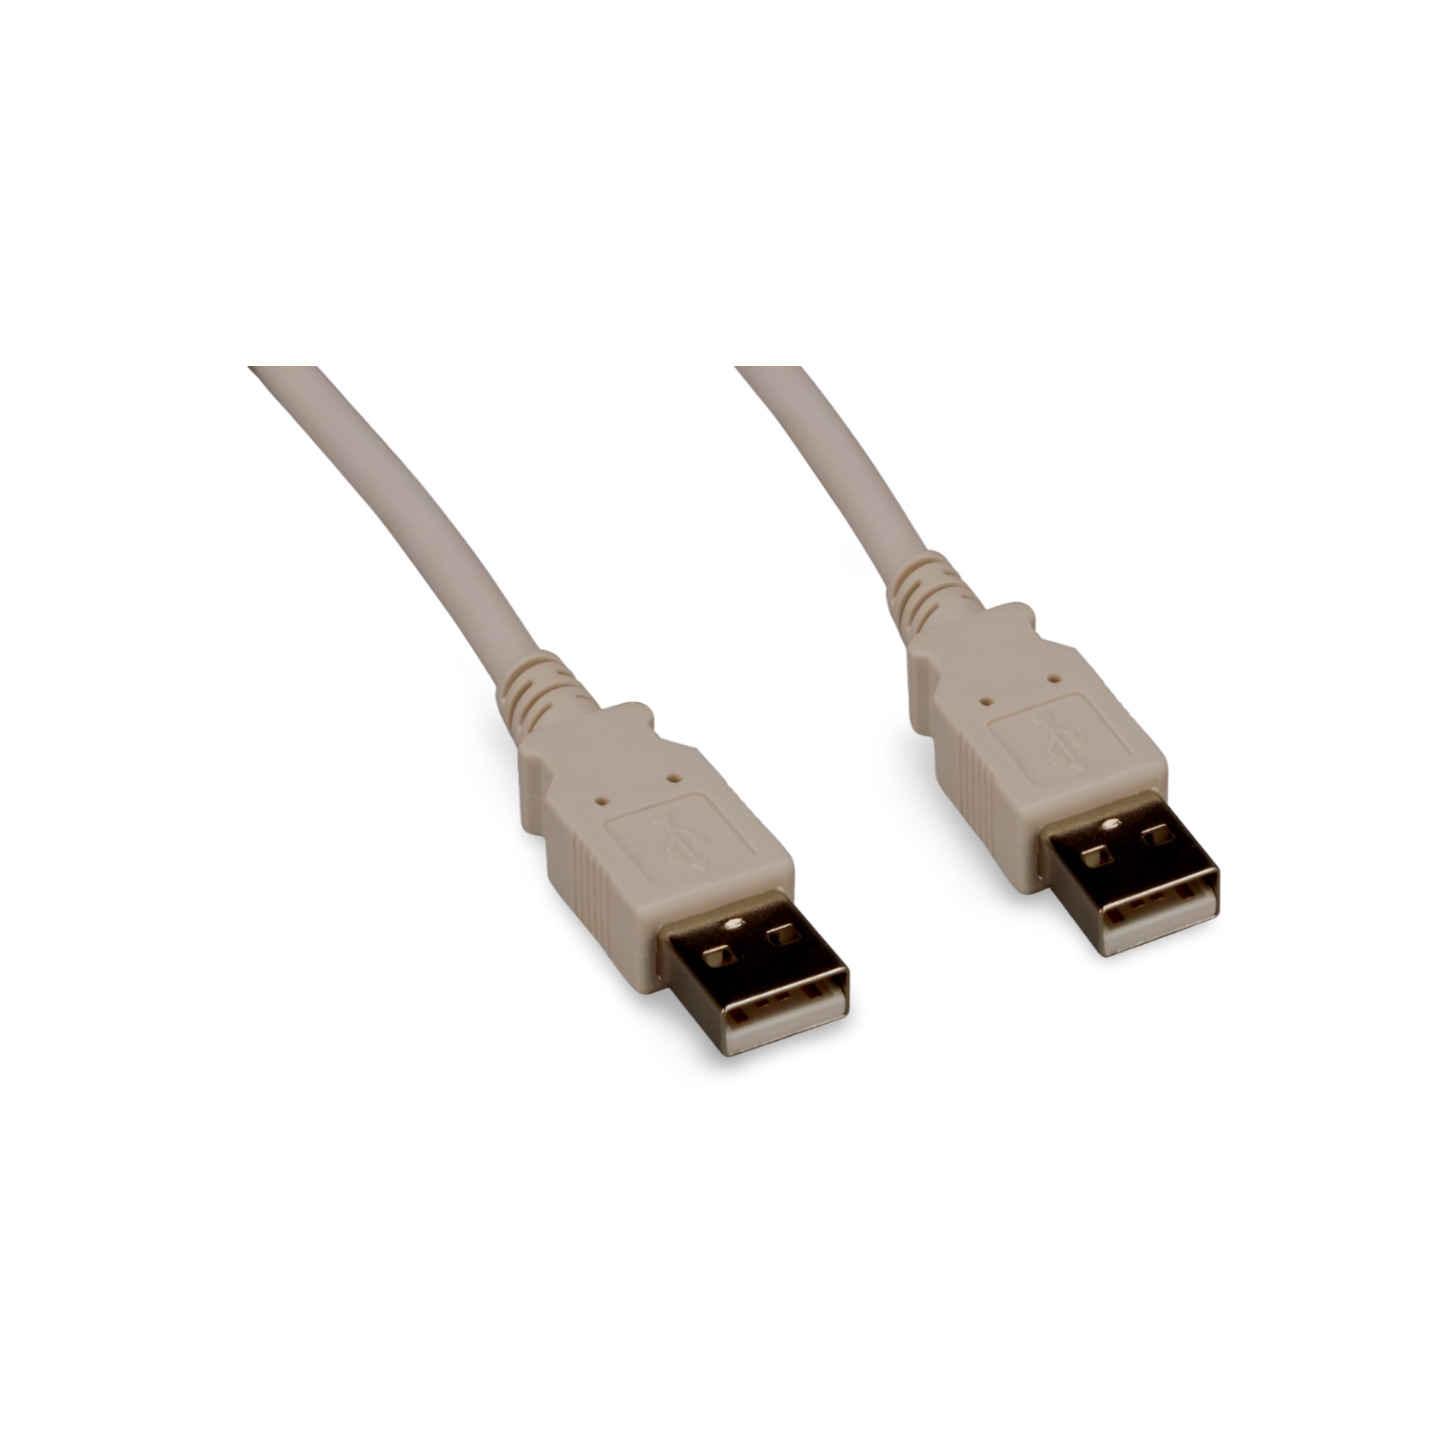 3ft USB Cable Type A Male to Type A Male Cable - Beige